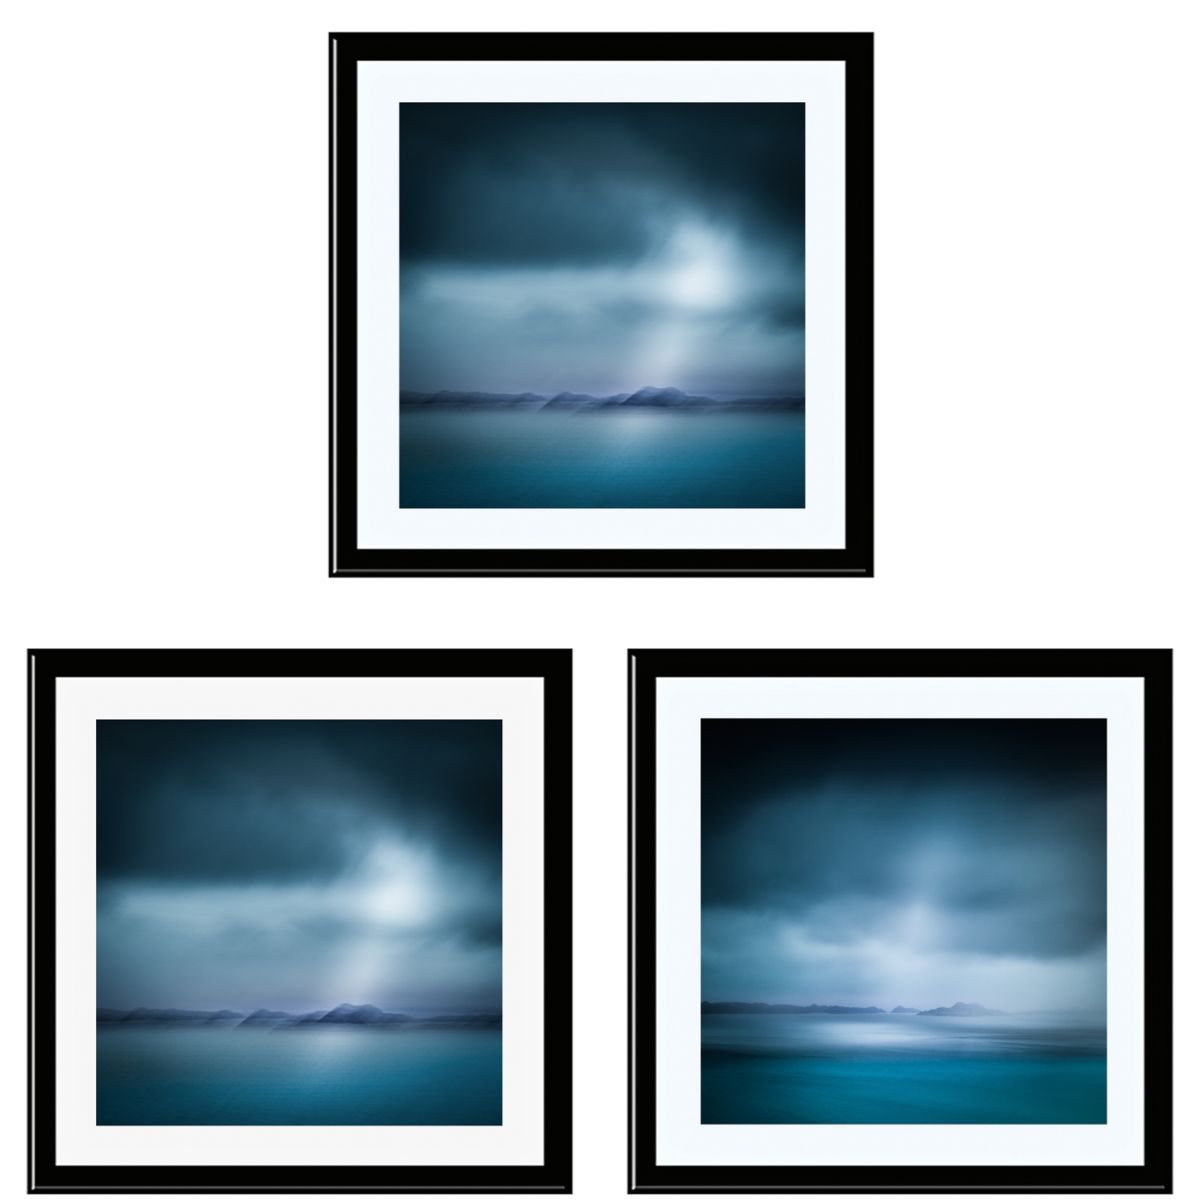 Island Dreams - Triptych - Extra large canvas prints in shades of blue by Lynne Douglas